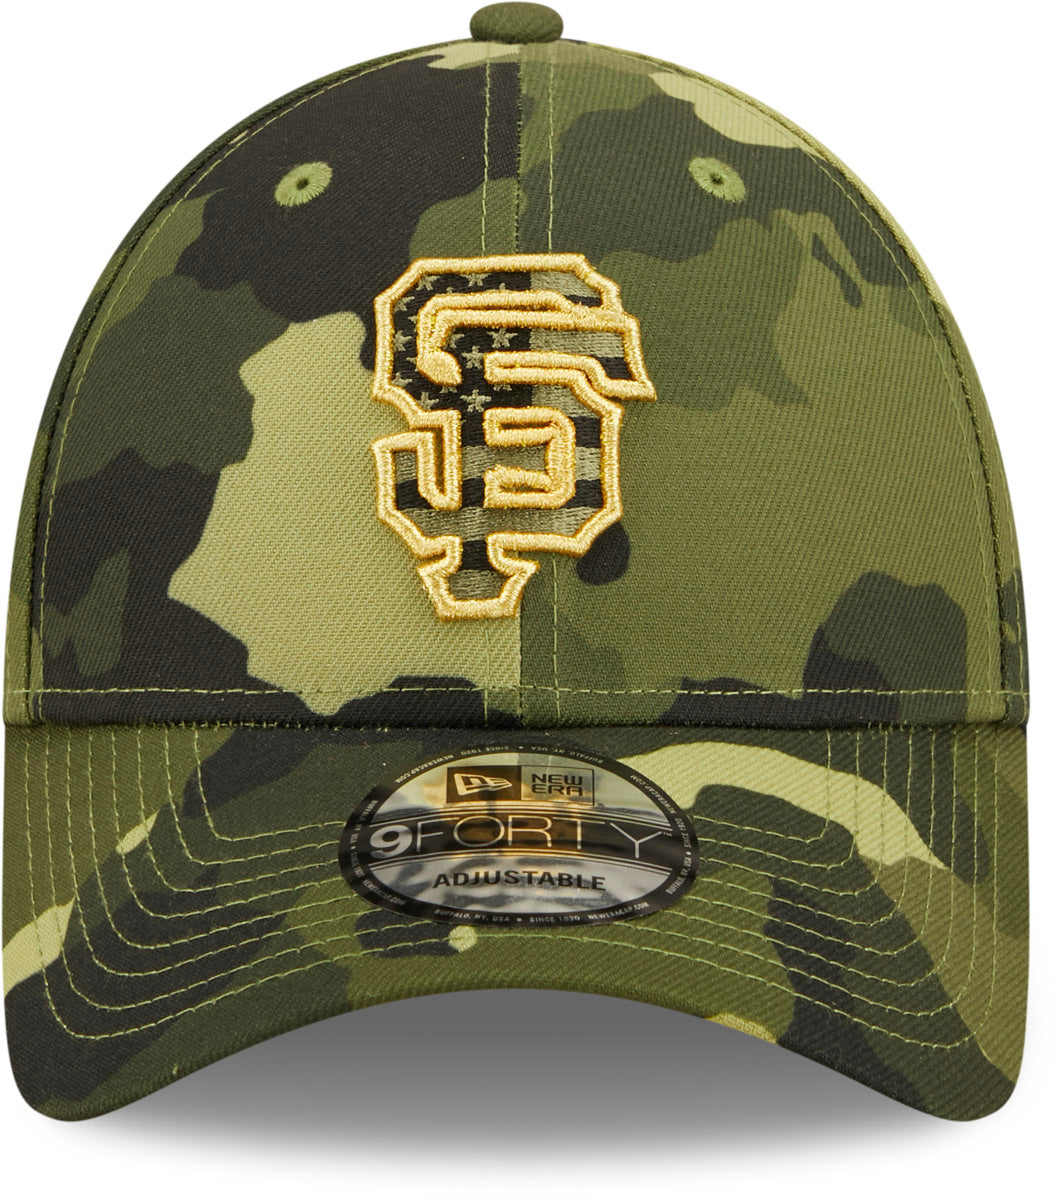 San Diego Padres Camo Hats, Padres Camouflage Shirts, Gear